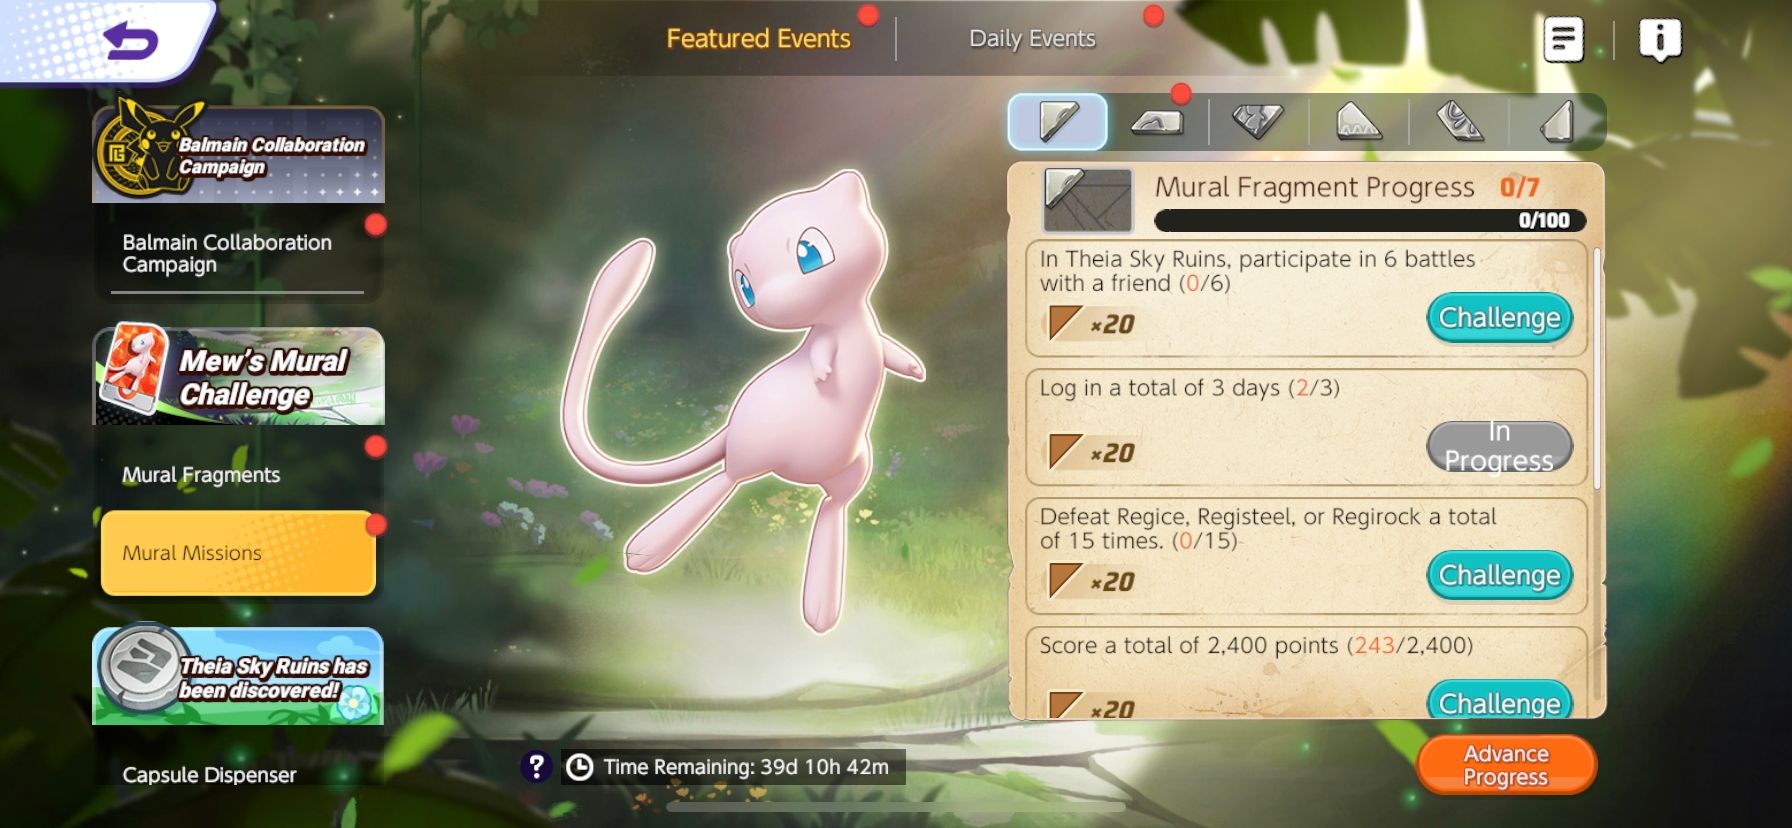 Missions for Mew's Mural Challenge from Pokemon Unite